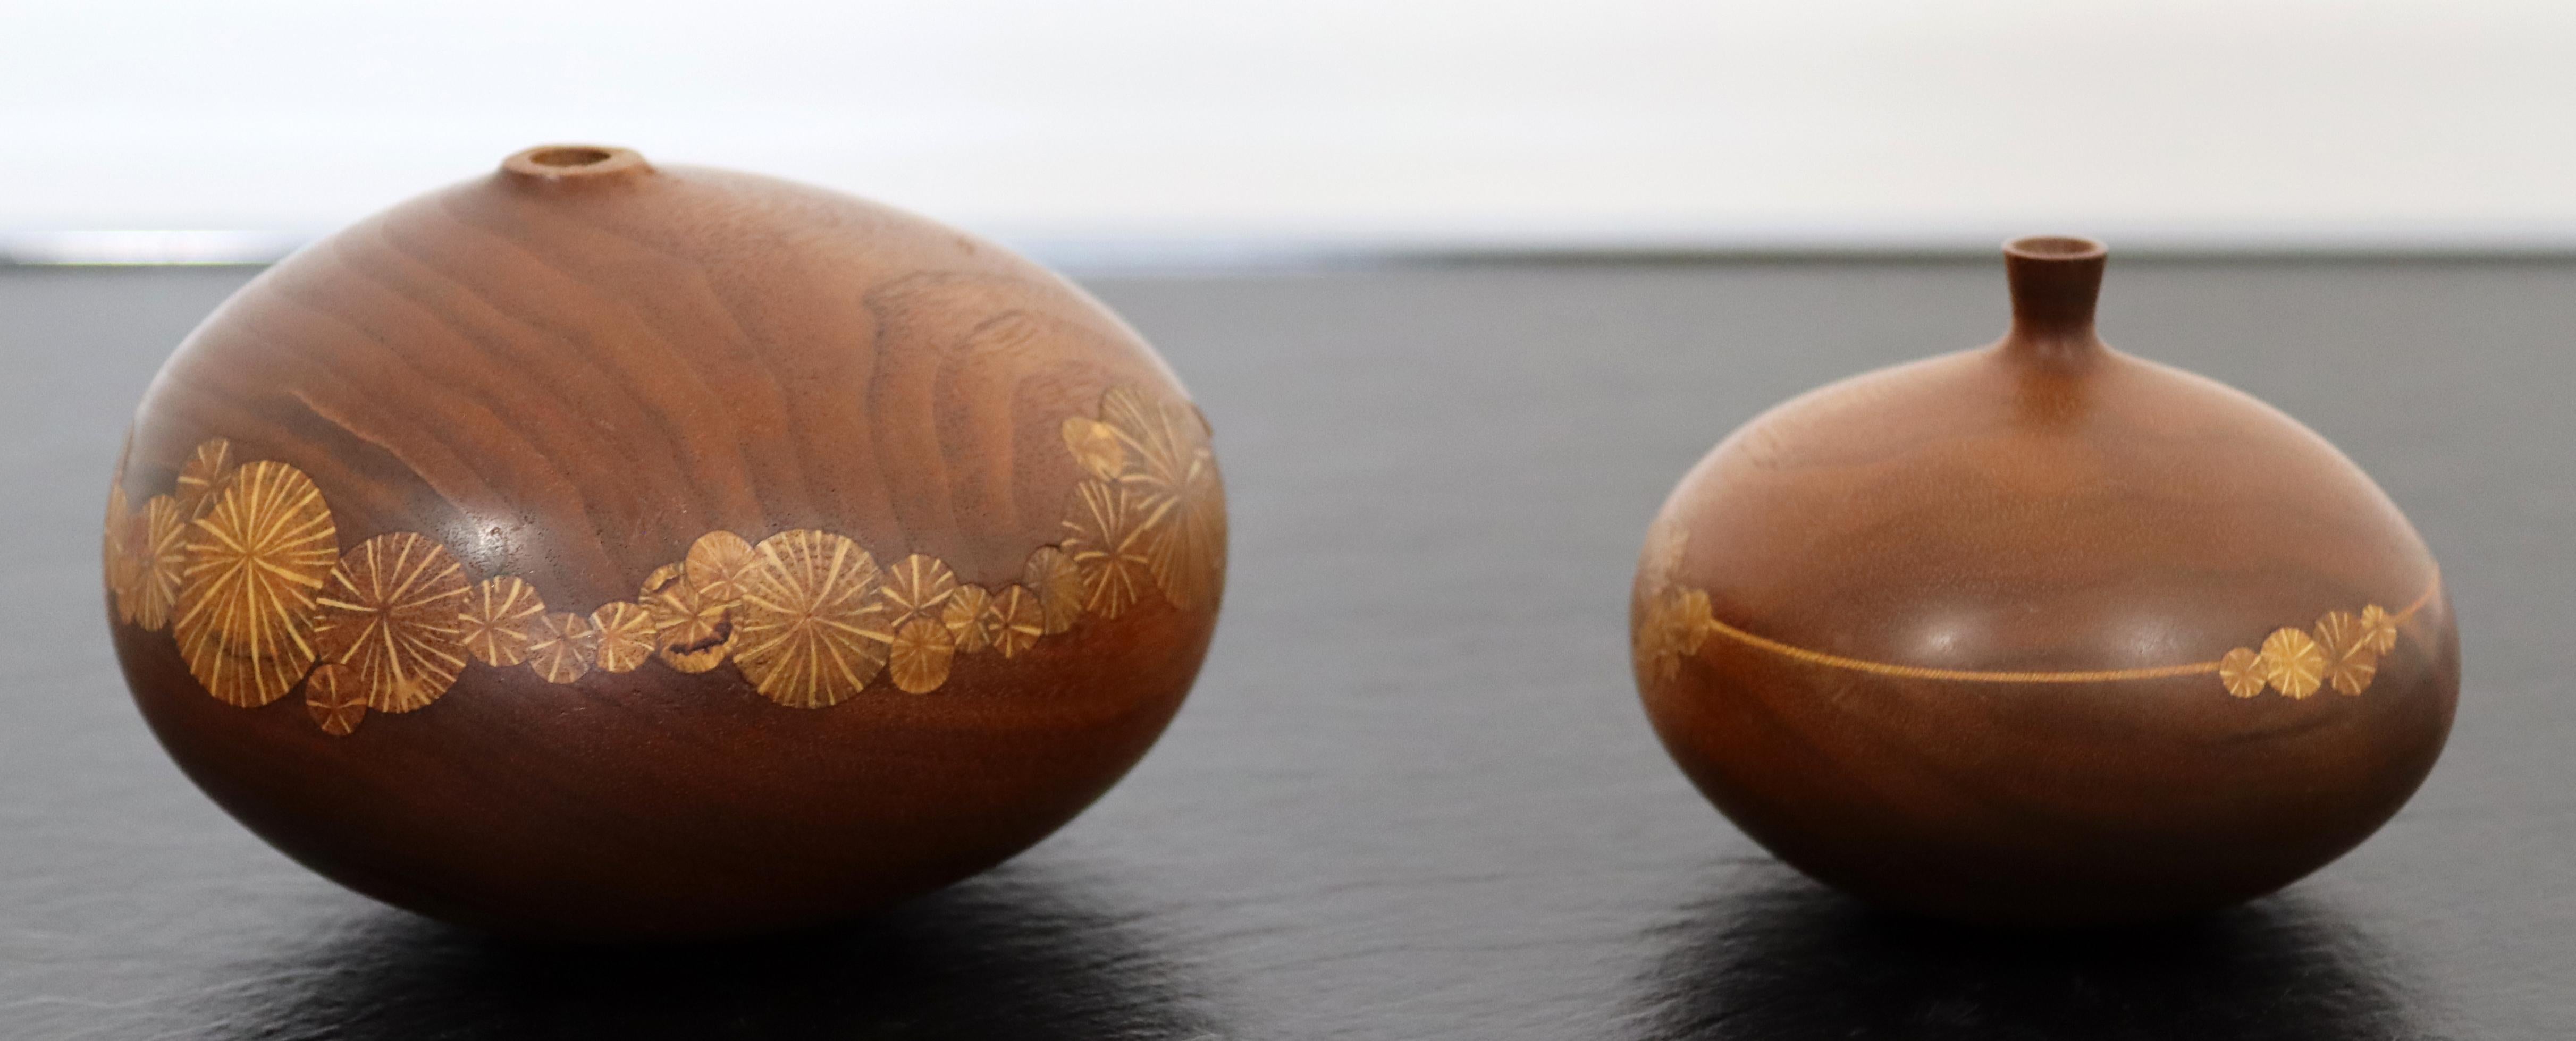 For your consideration is a lovely pair of wood vessels, with engraved floral patterns, signed by Roger Sloan, circa the 1970s. In excellent vintage condition. The dimensions are 4